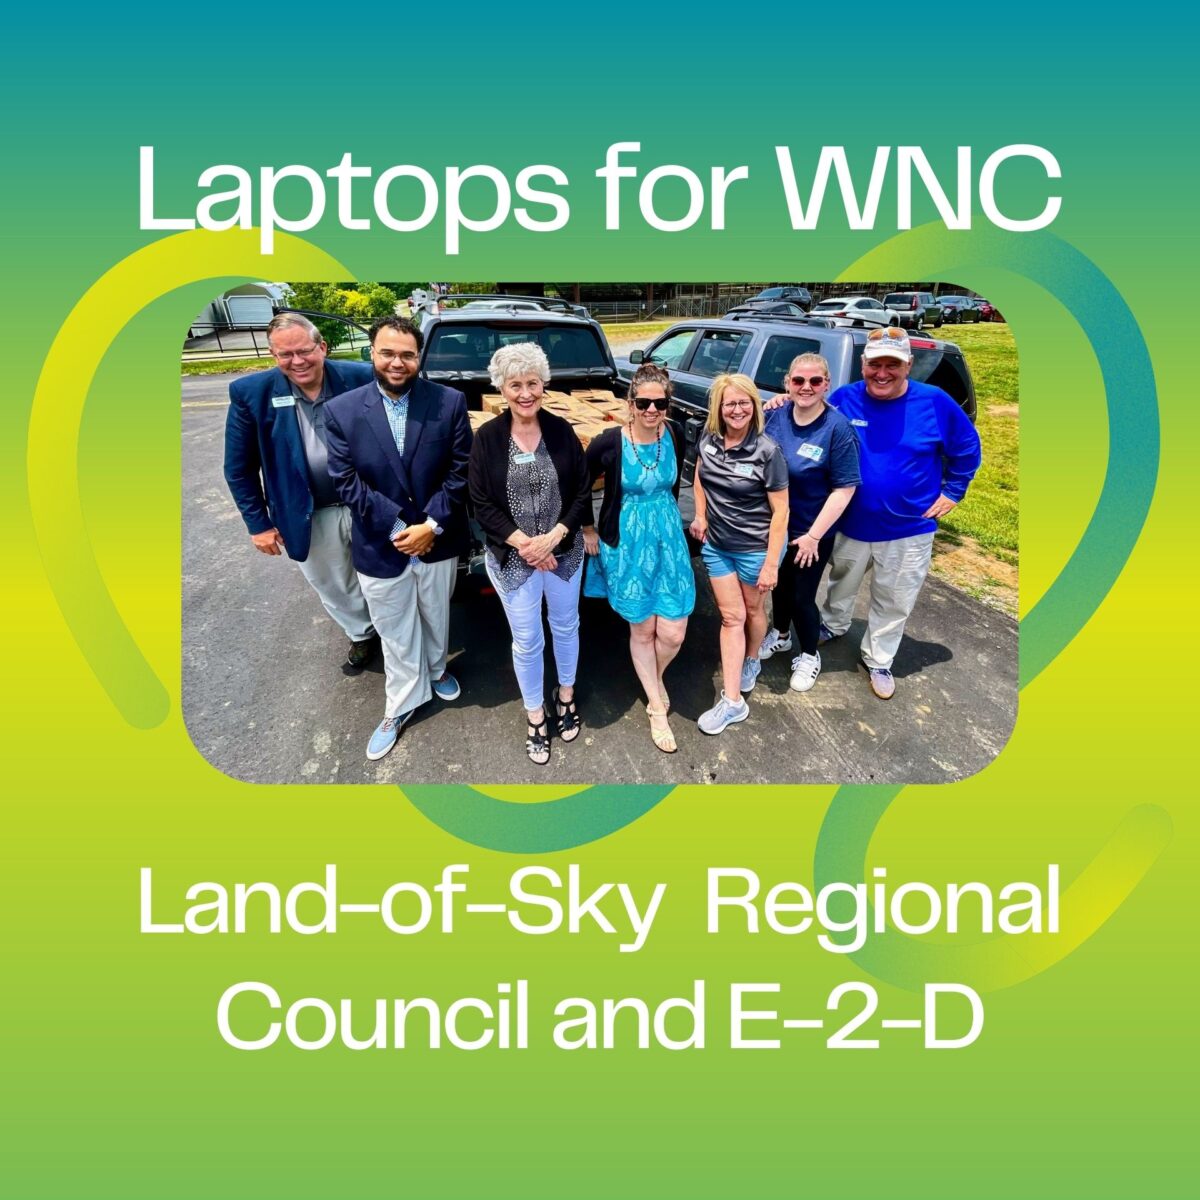 Laptops for WNC